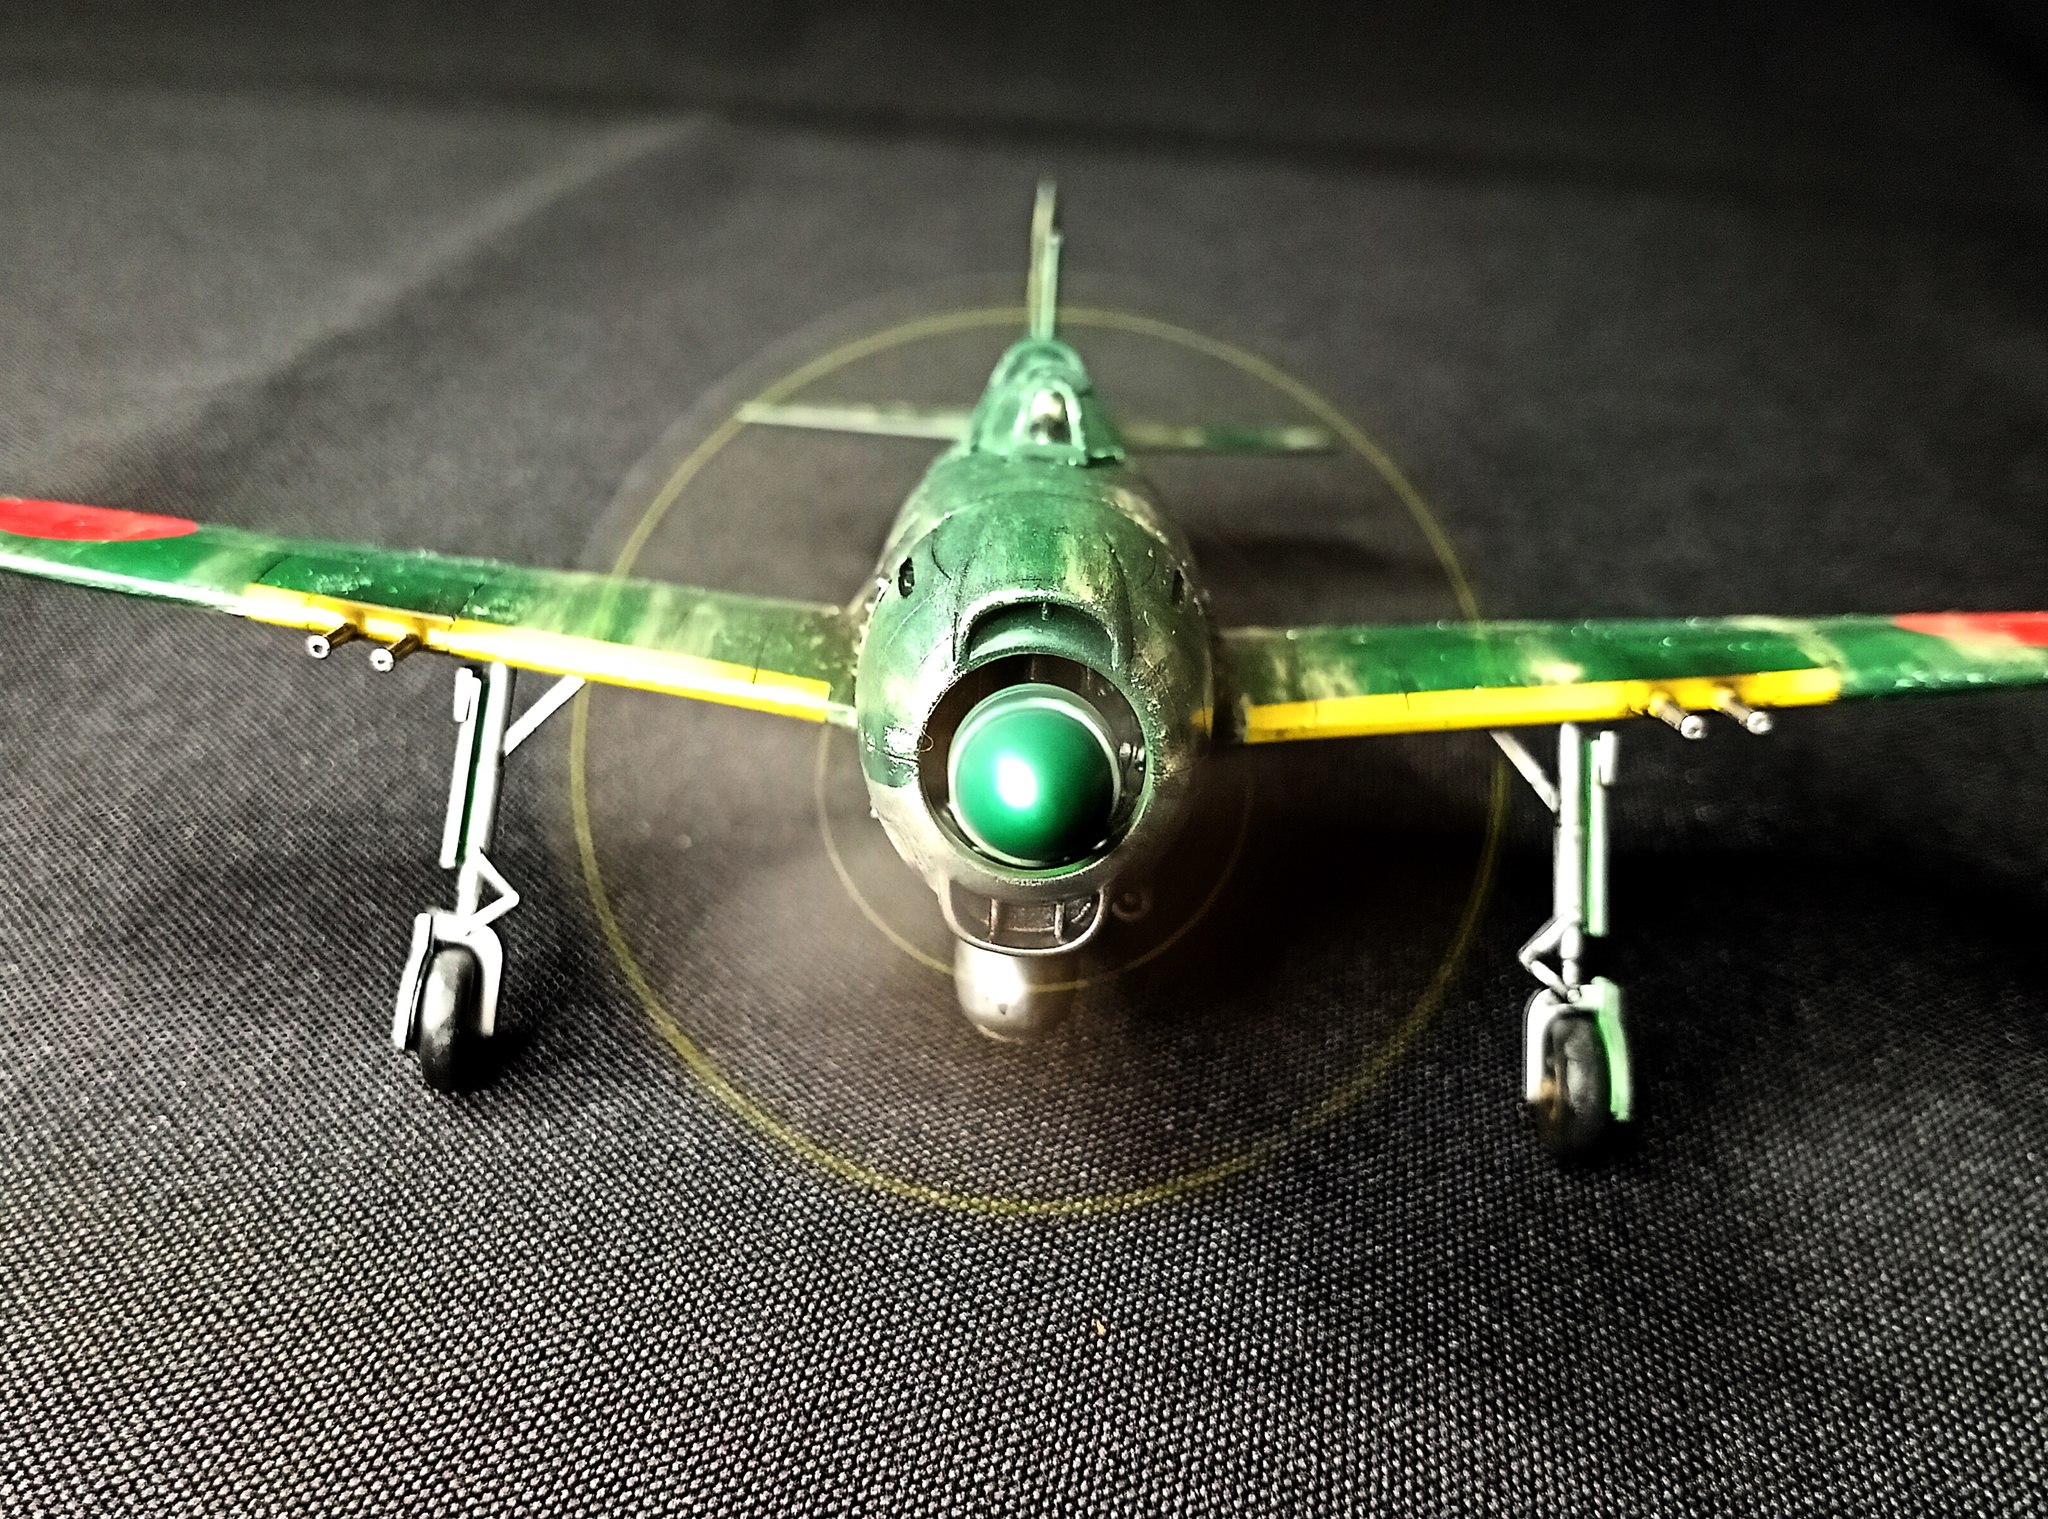 Hydroplane without floats. - My, Modeling, Stand modeling, Prefabricated model, Aircraft modeling, Hobby, Miniature, With your own hands, Needlework without process, , Aviation, Story, Airplane, The Second World War, Japan, Fighter, Video, Longpost